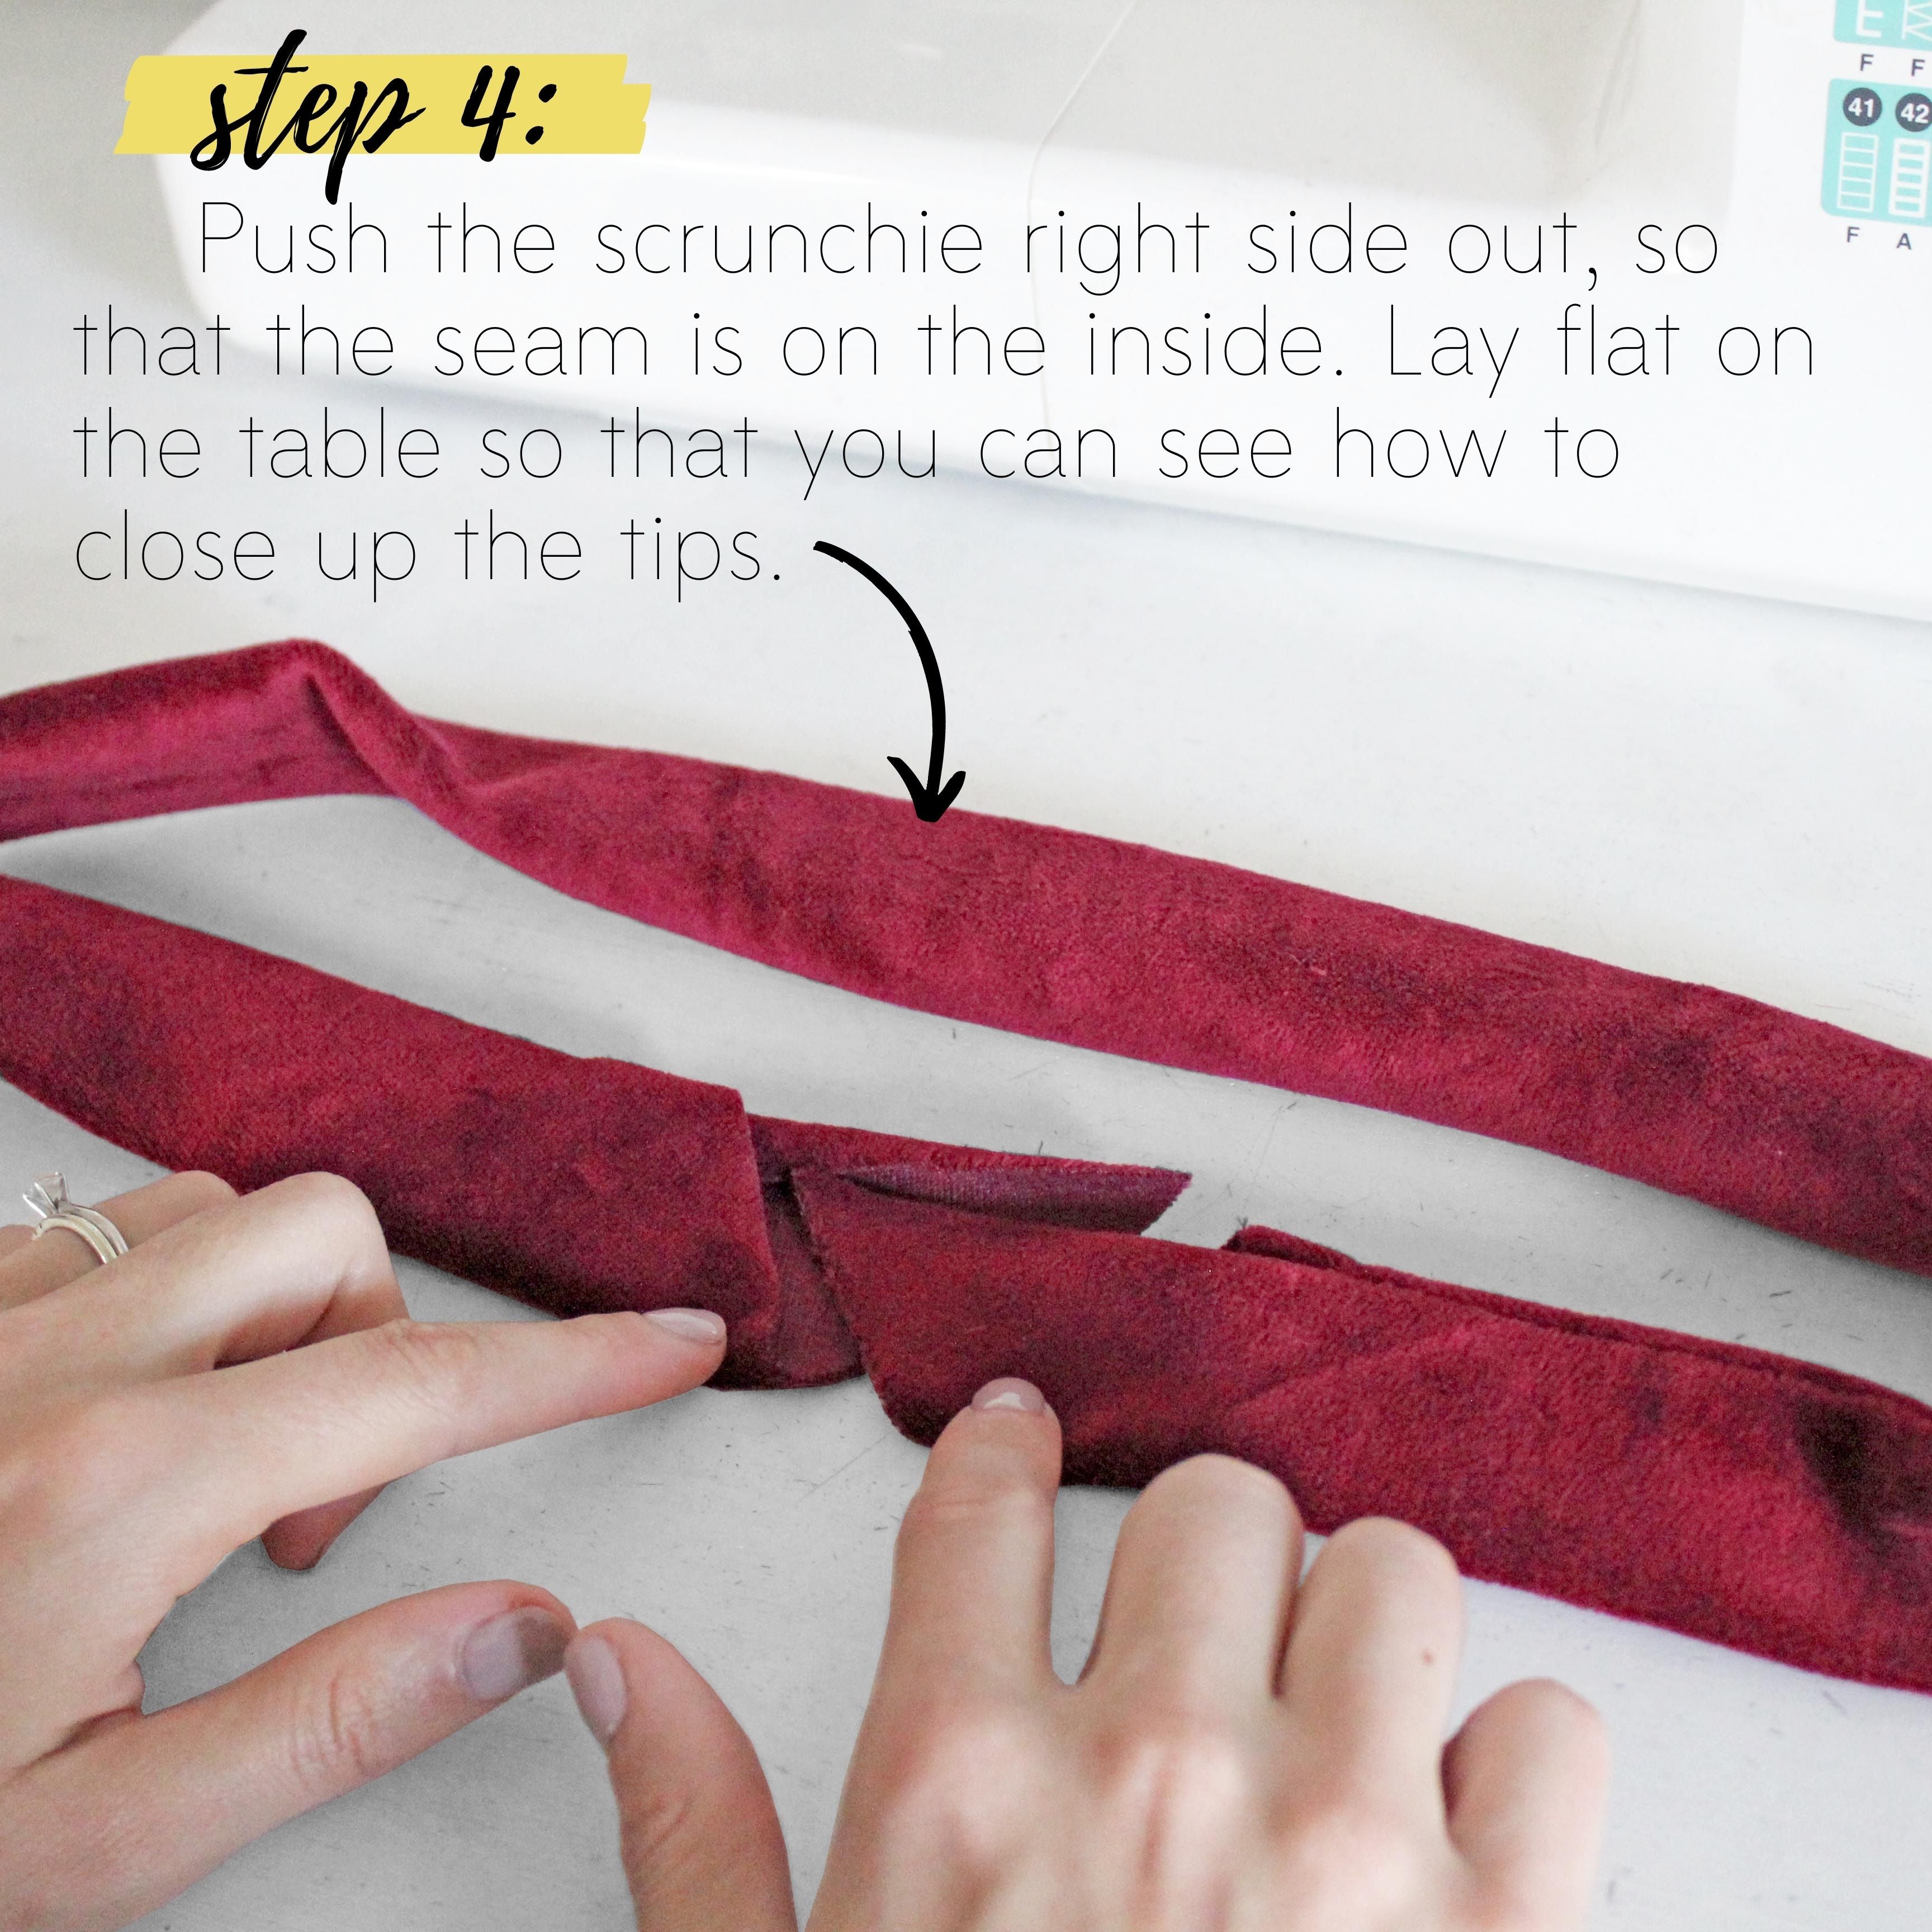 How To Make A Scrunchie DIY Sewing Tutorial: Step 4